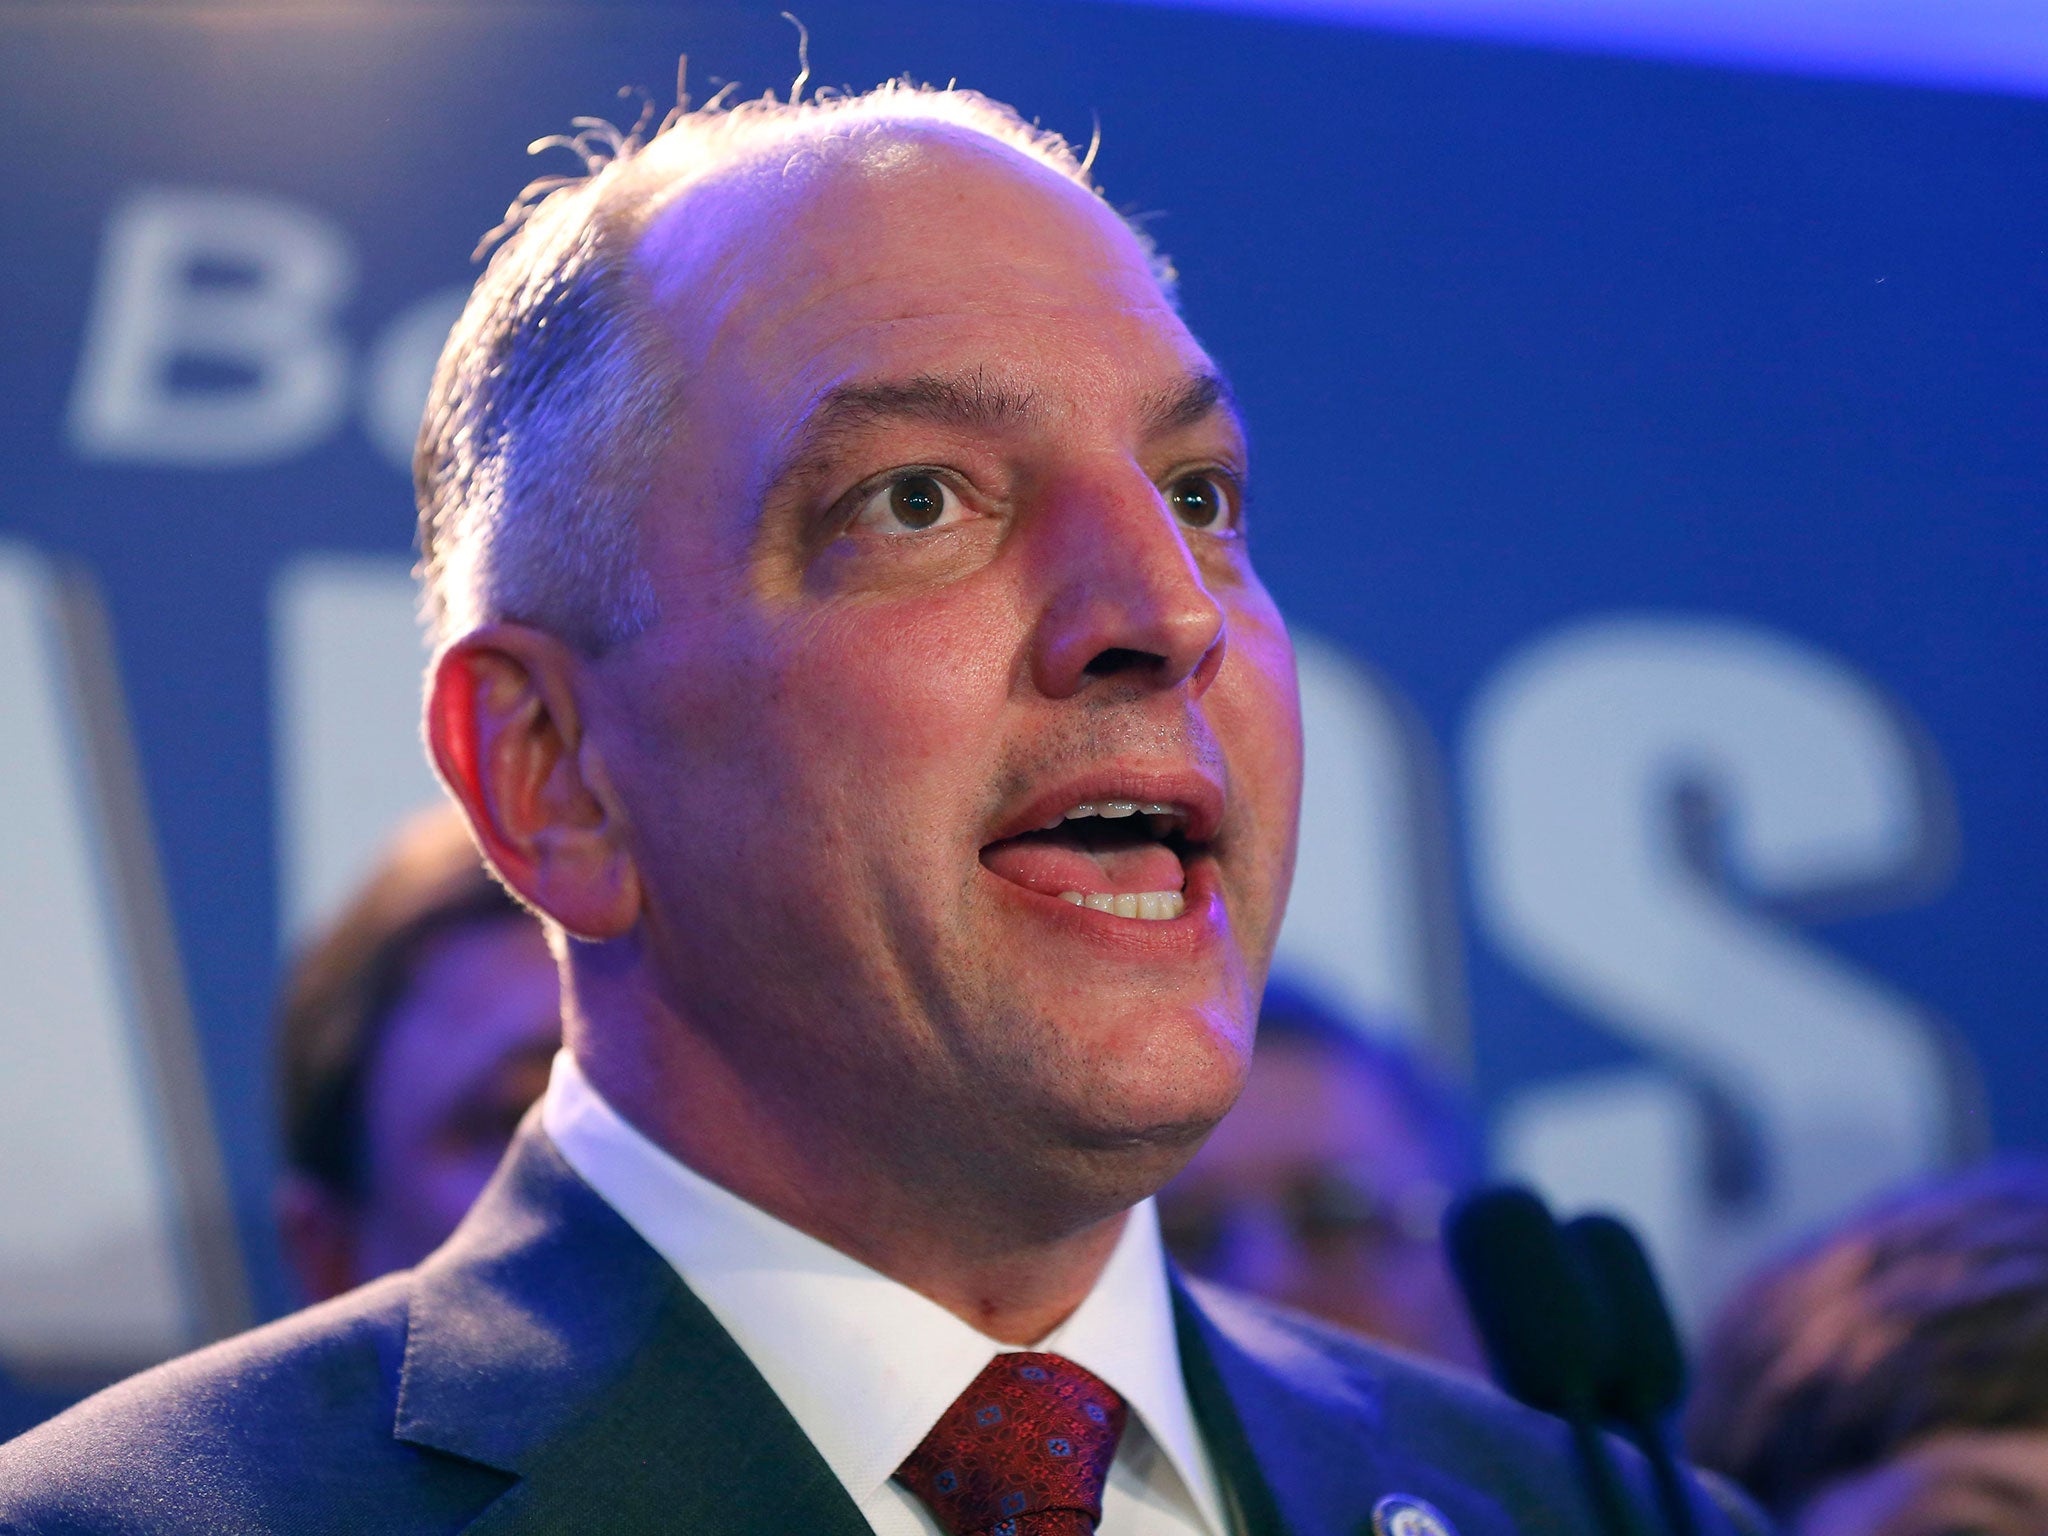 John Bel Edwards will become the only Democratic governor of a southern US state in January 2016